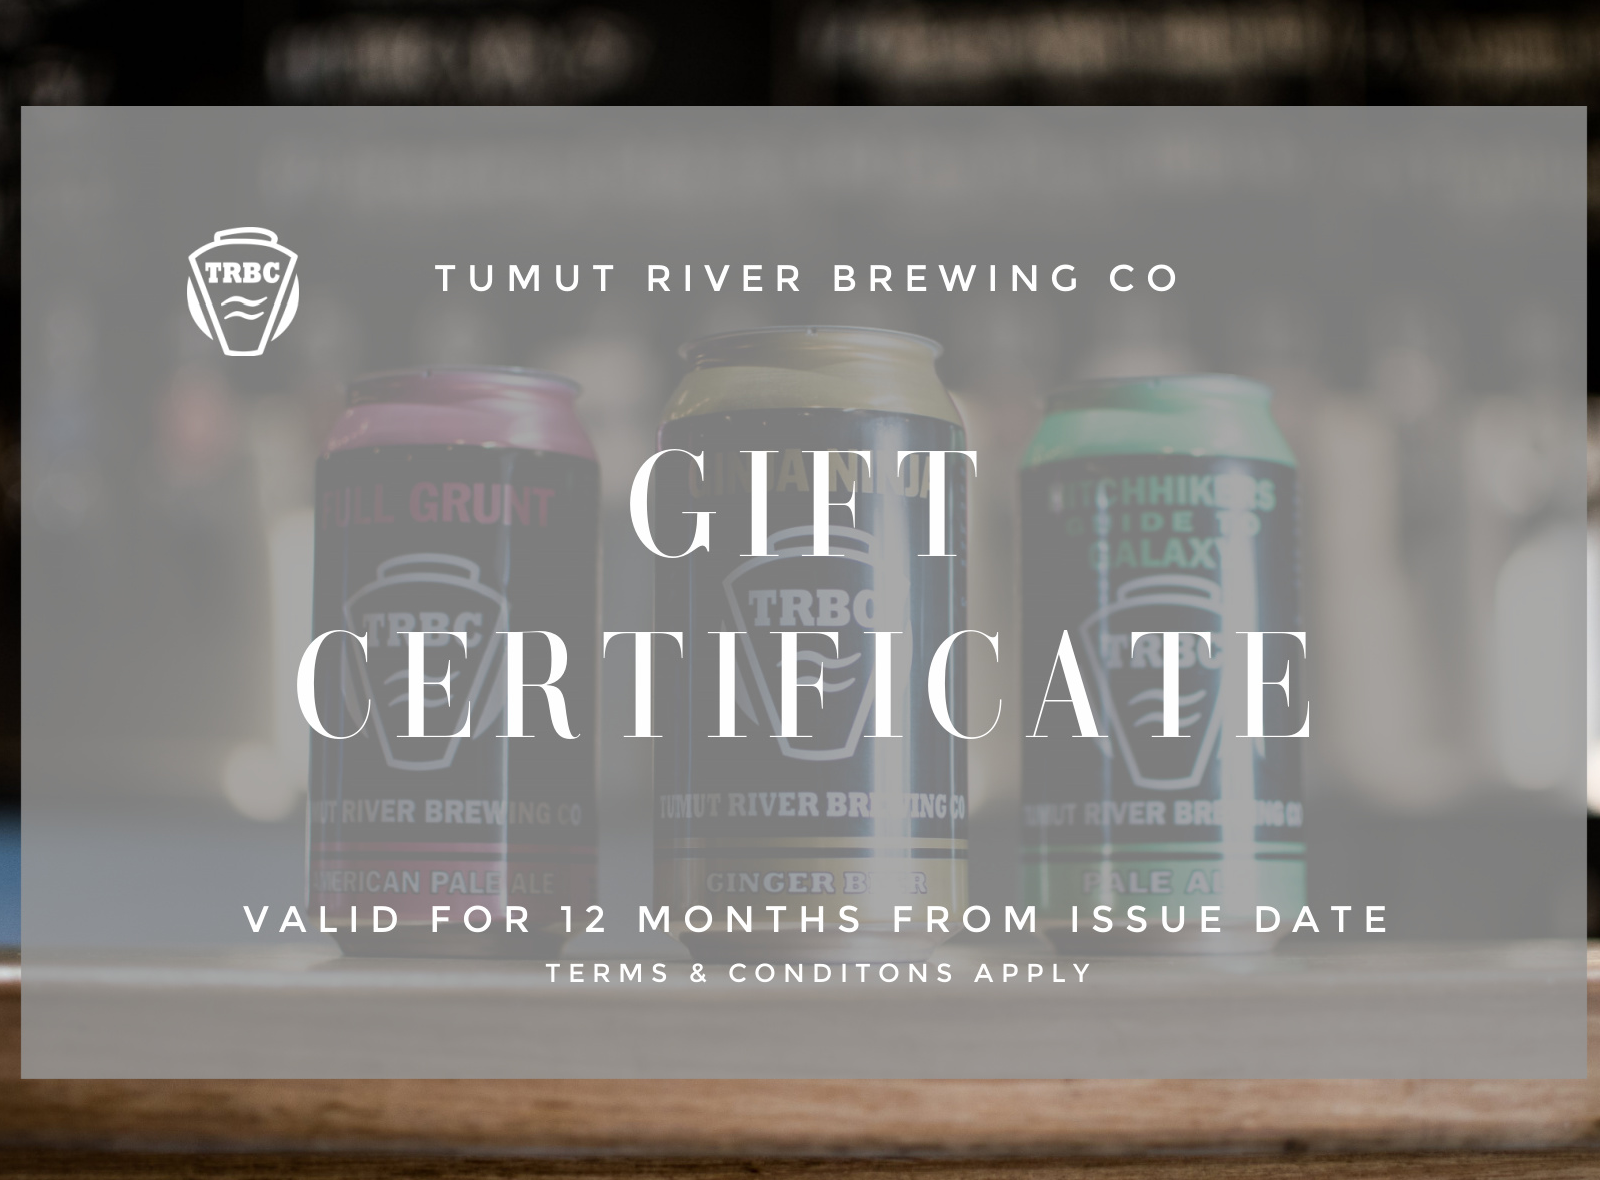 Tumut River brewing co